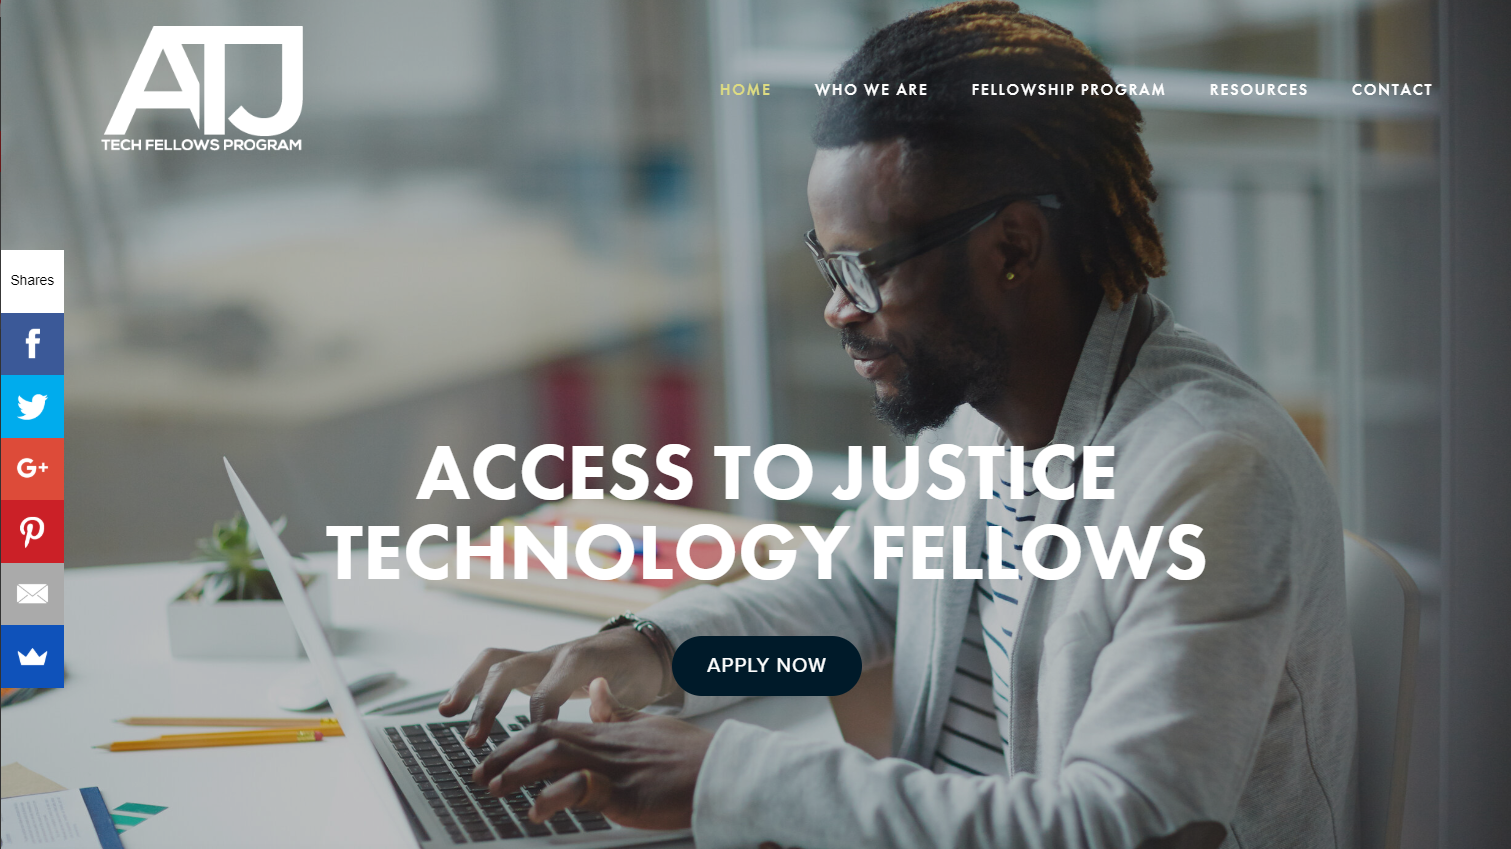 WordRake Donates Its Software To Help Hone Writing Skills Of Access To Justice Fellows